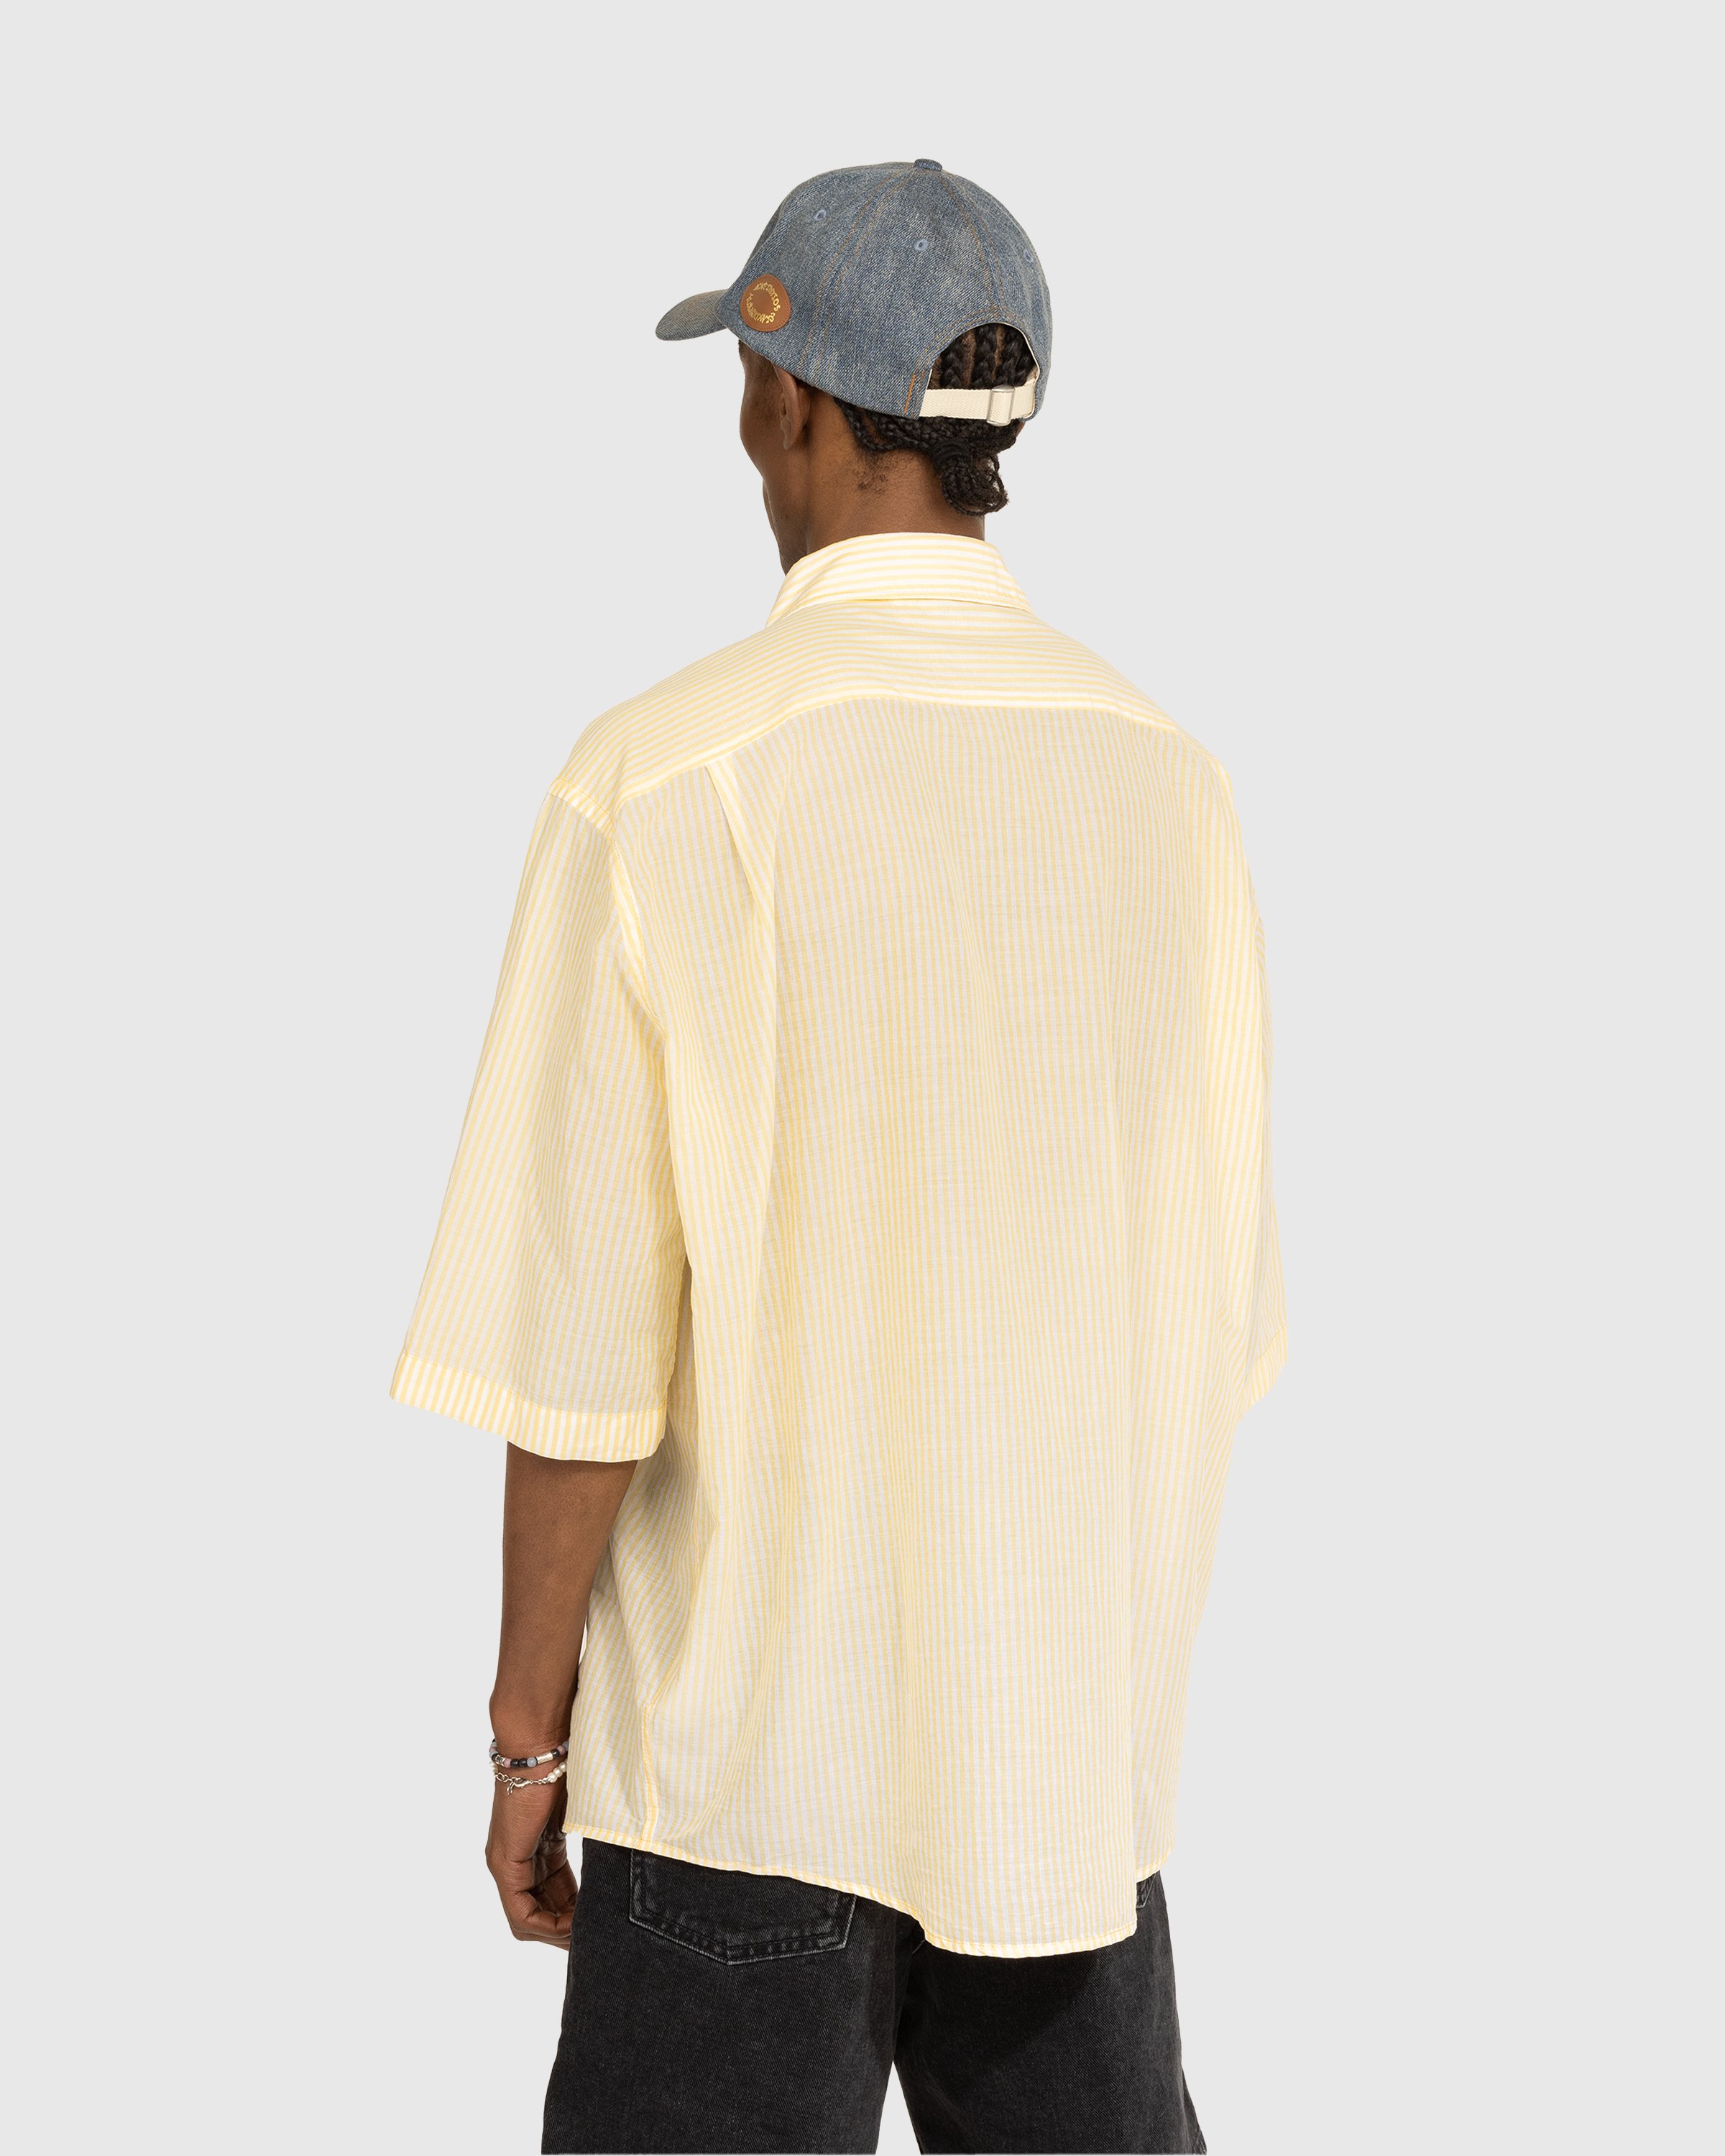 Acne Studios - Short Sleeve Button-Up Shirt Yellow - Clothing - Yellow - Image 3